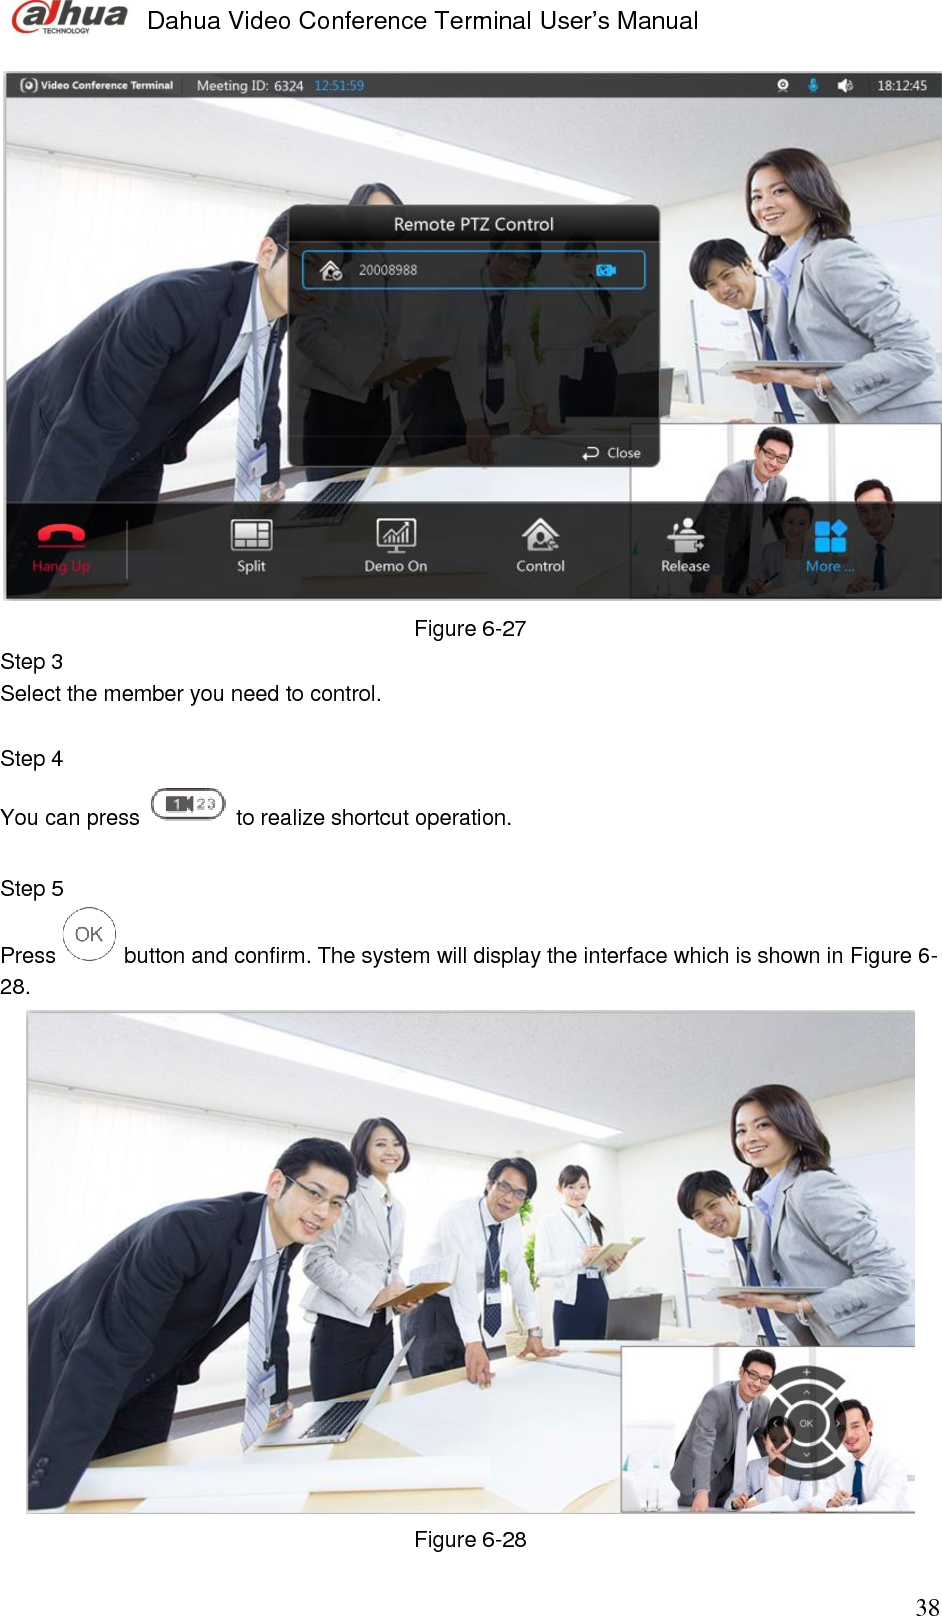  Dahua Video Conference Terminal User’s Manual                                                                              38  Figure 6-27 Step 3  Select the member you need to control.   Step 4  You can press   to realize shortcut operation.   Step 5  Press   button and confirm. The system will display the interface which is shown in Figure 6-28.   Figure 6-28 